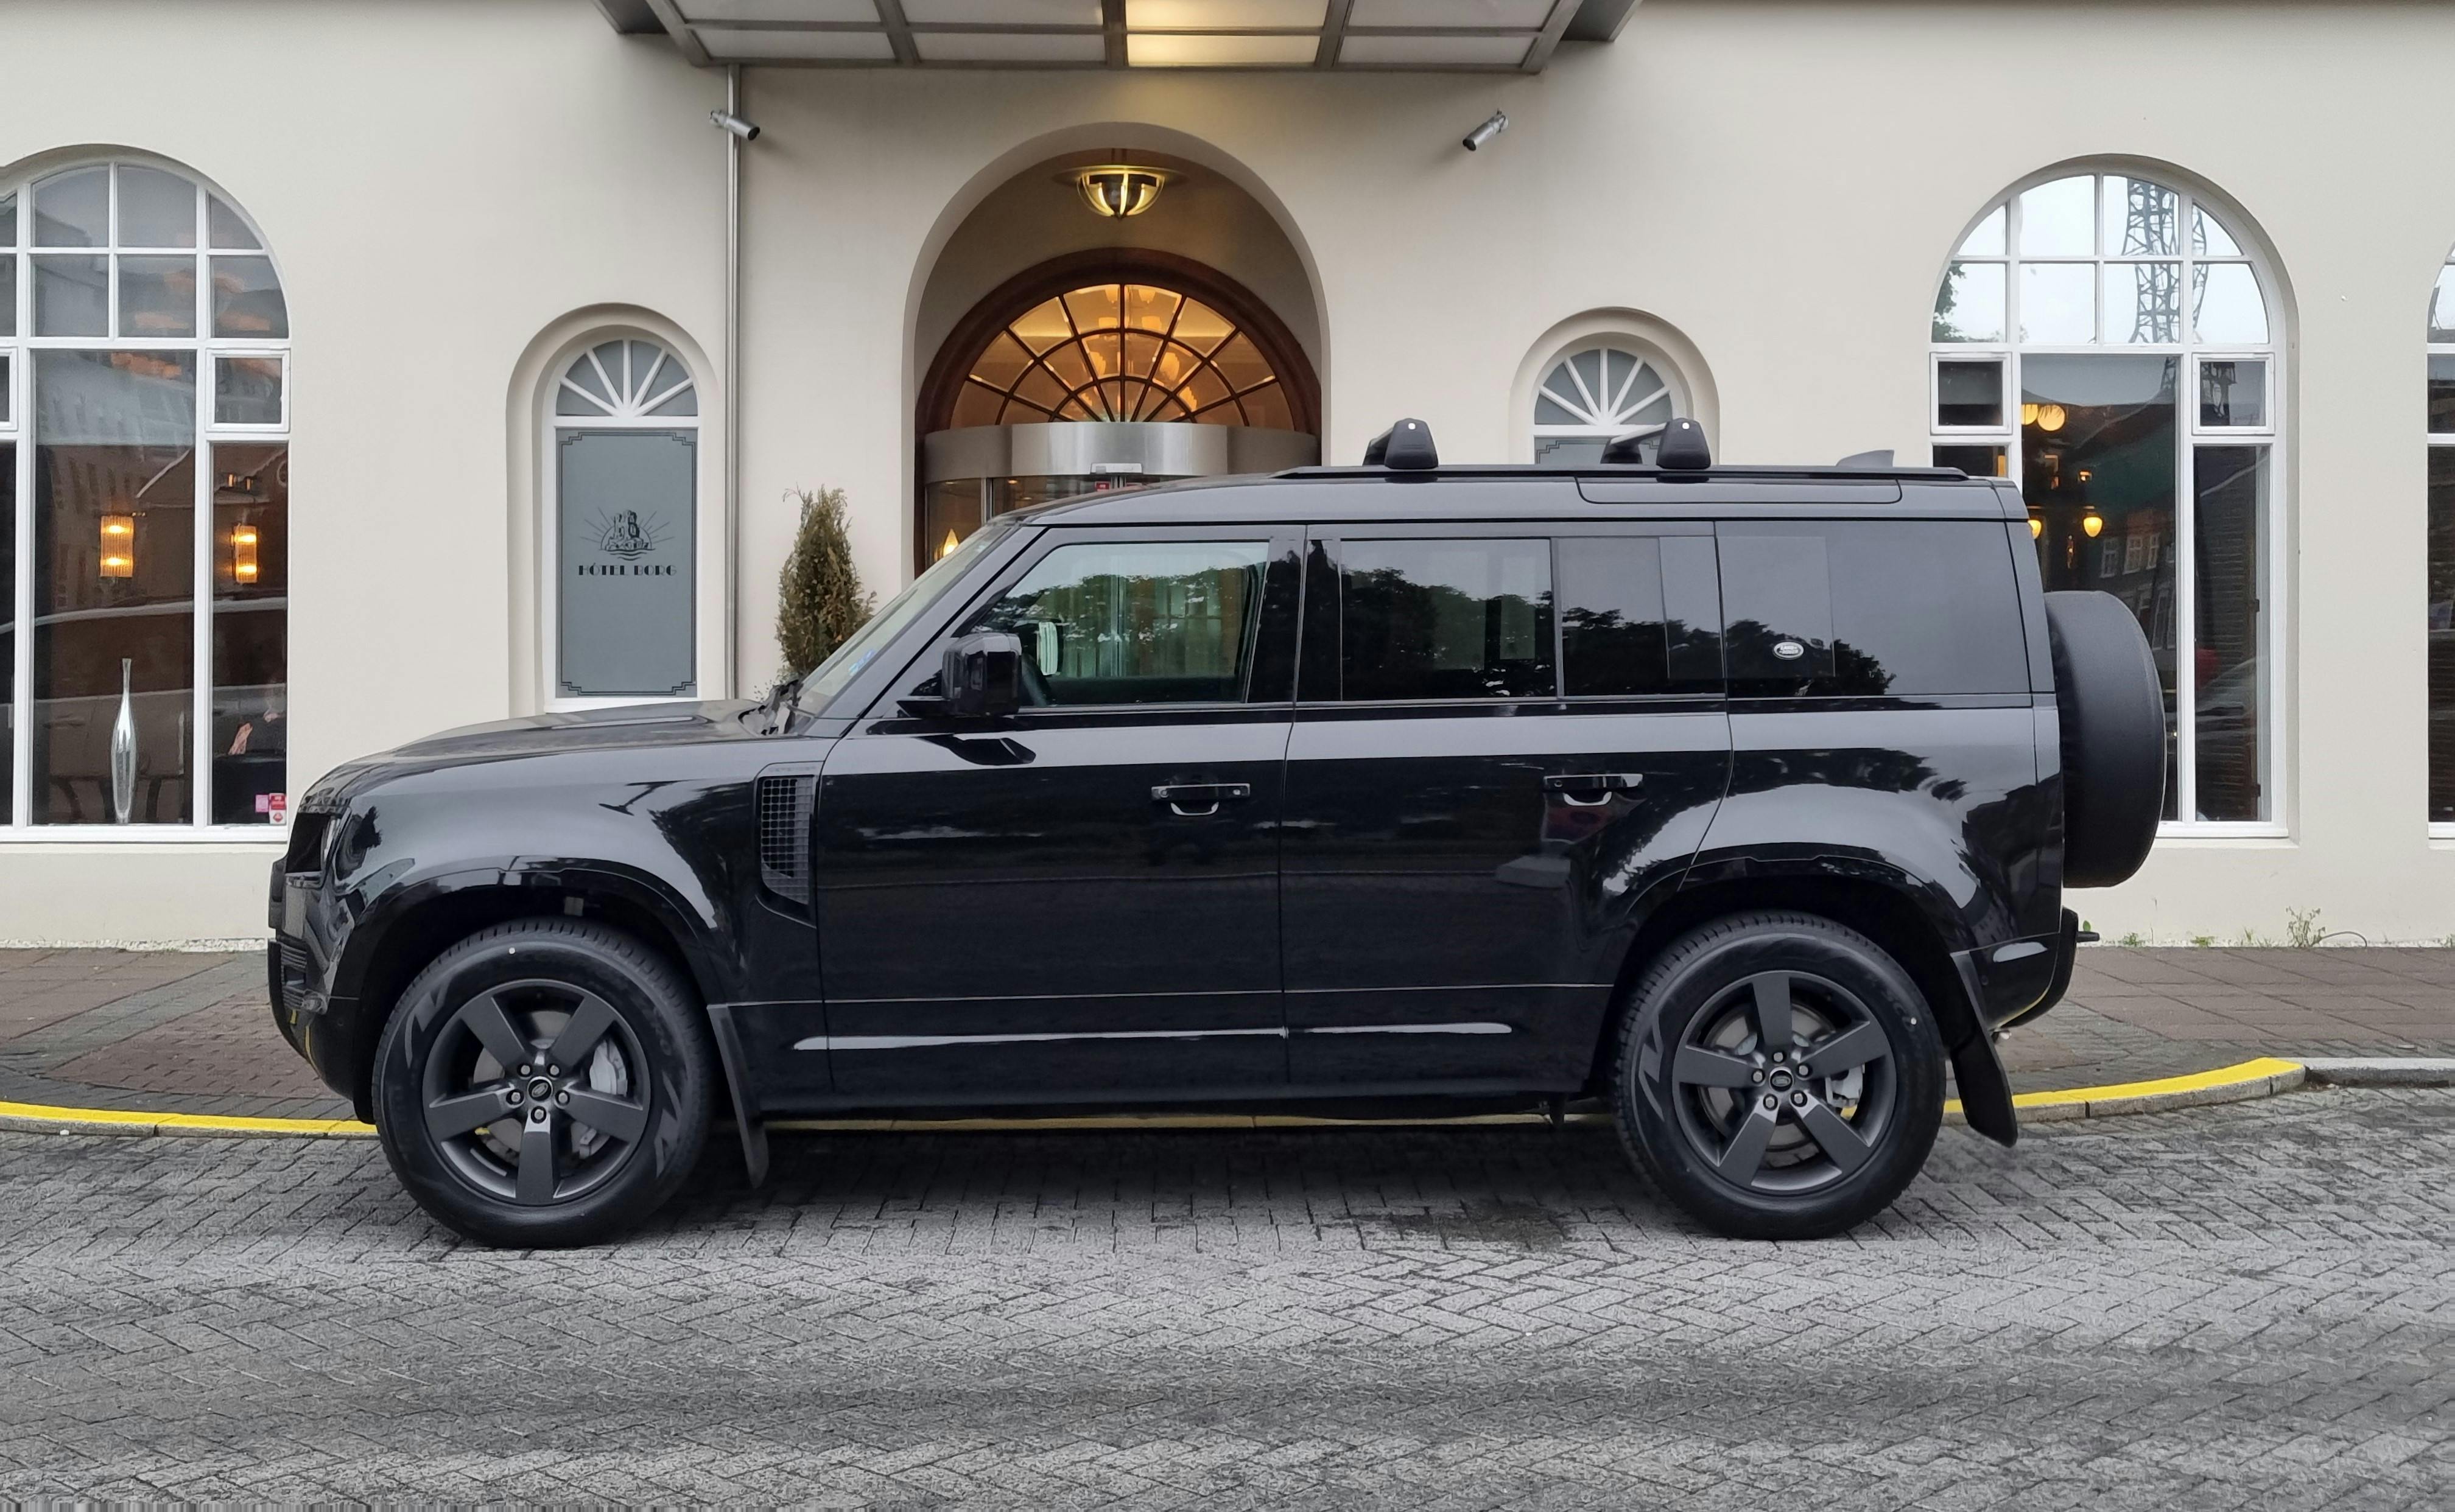 A comfortable and spacious Land Rover Defender will be your means of transportation for this private transfer to the center of Reykjavik.